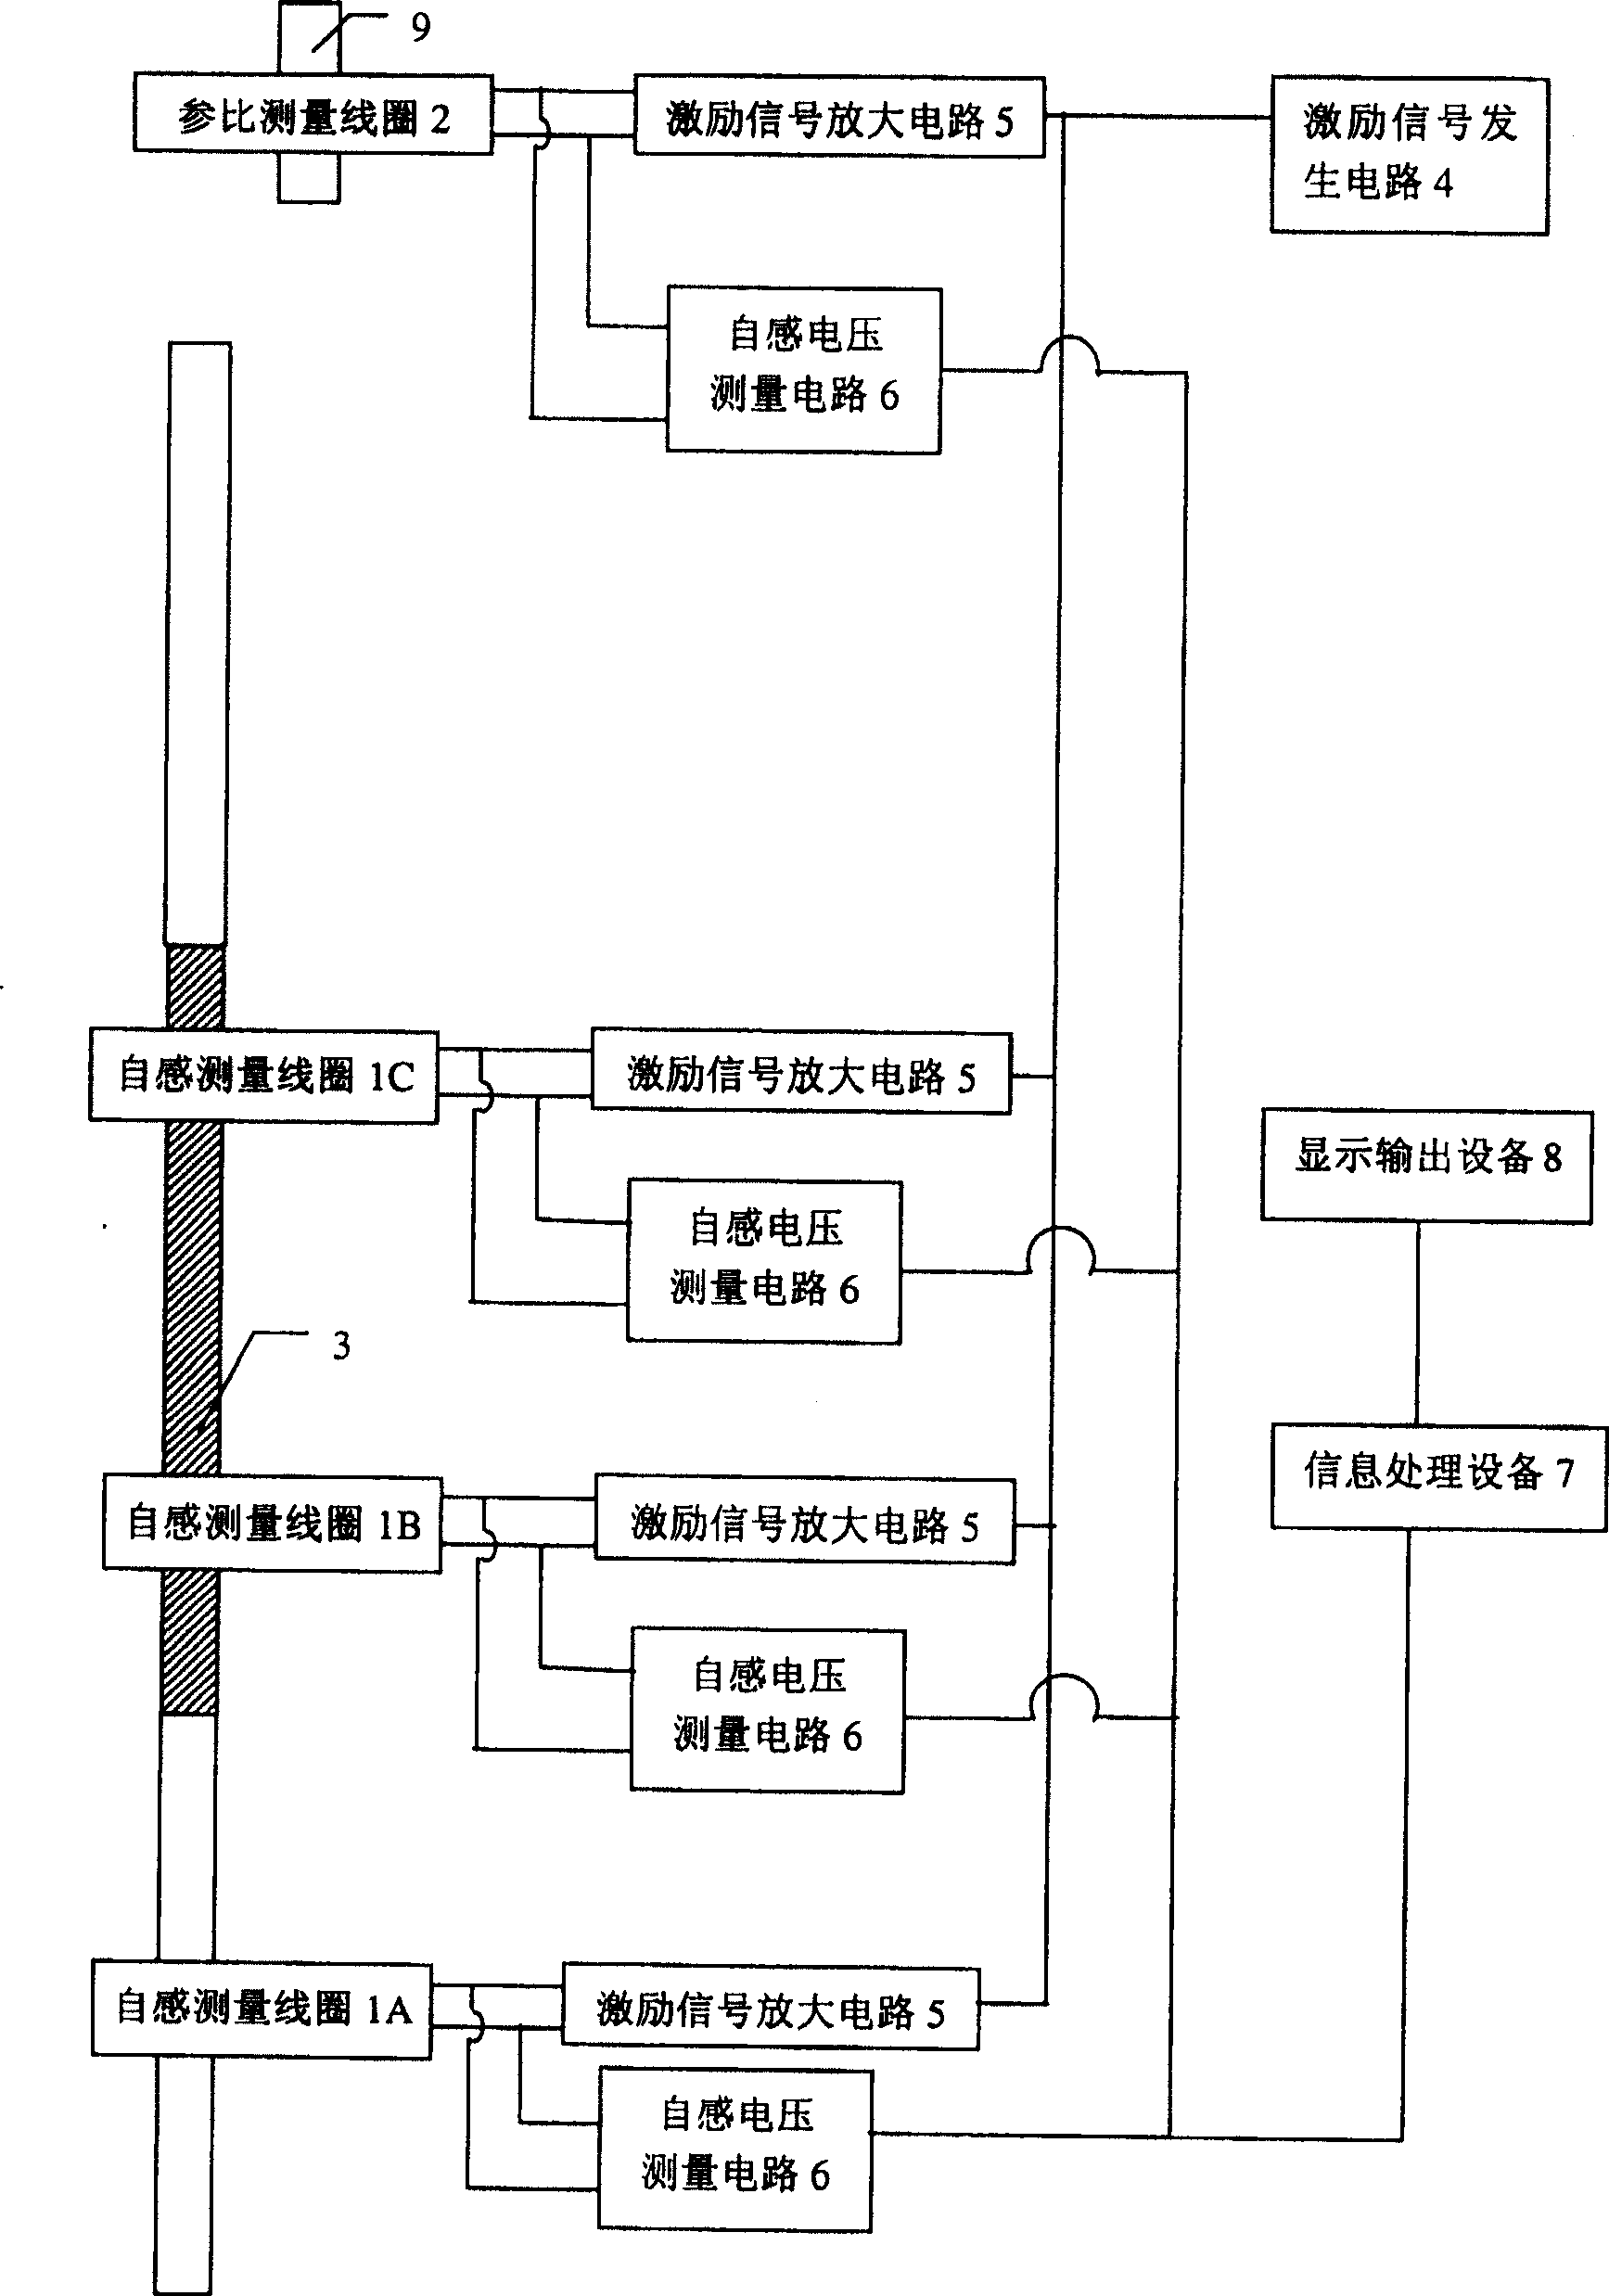 Coil self-inductance based control rod position measuring system